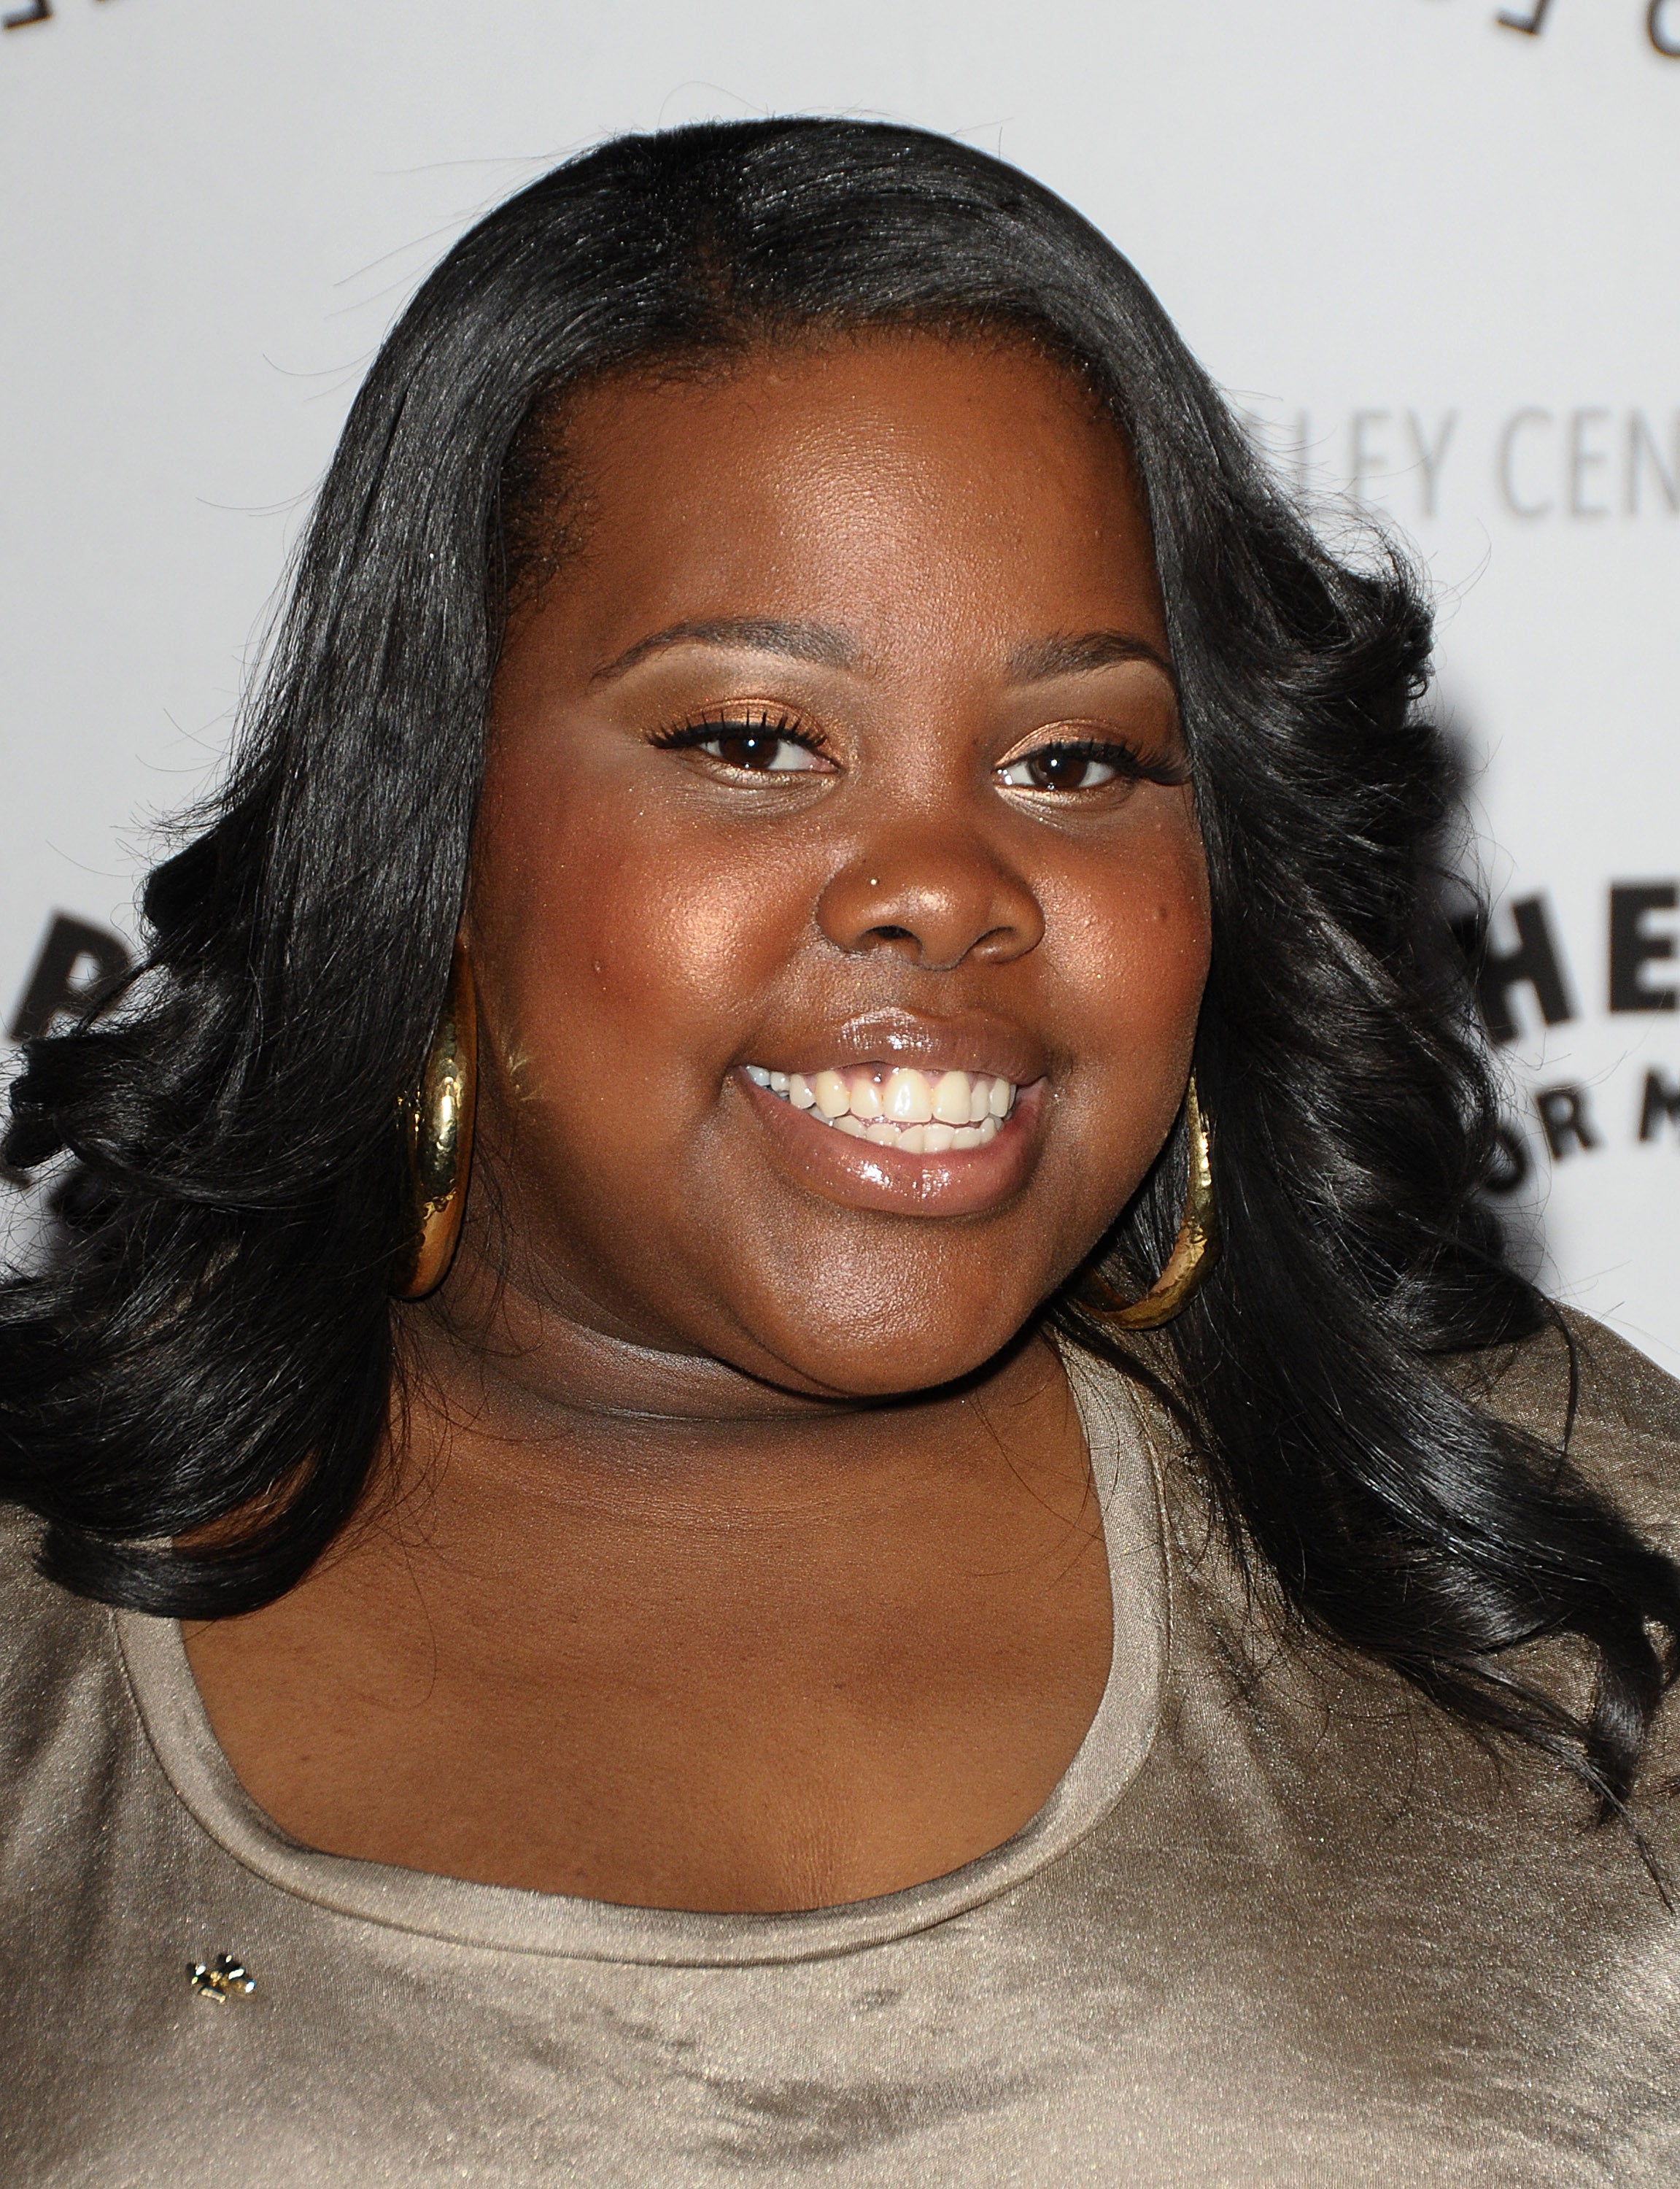 EXCLUSIVE: Amber Riley on Her NYC Stage Debut & 'Glee'